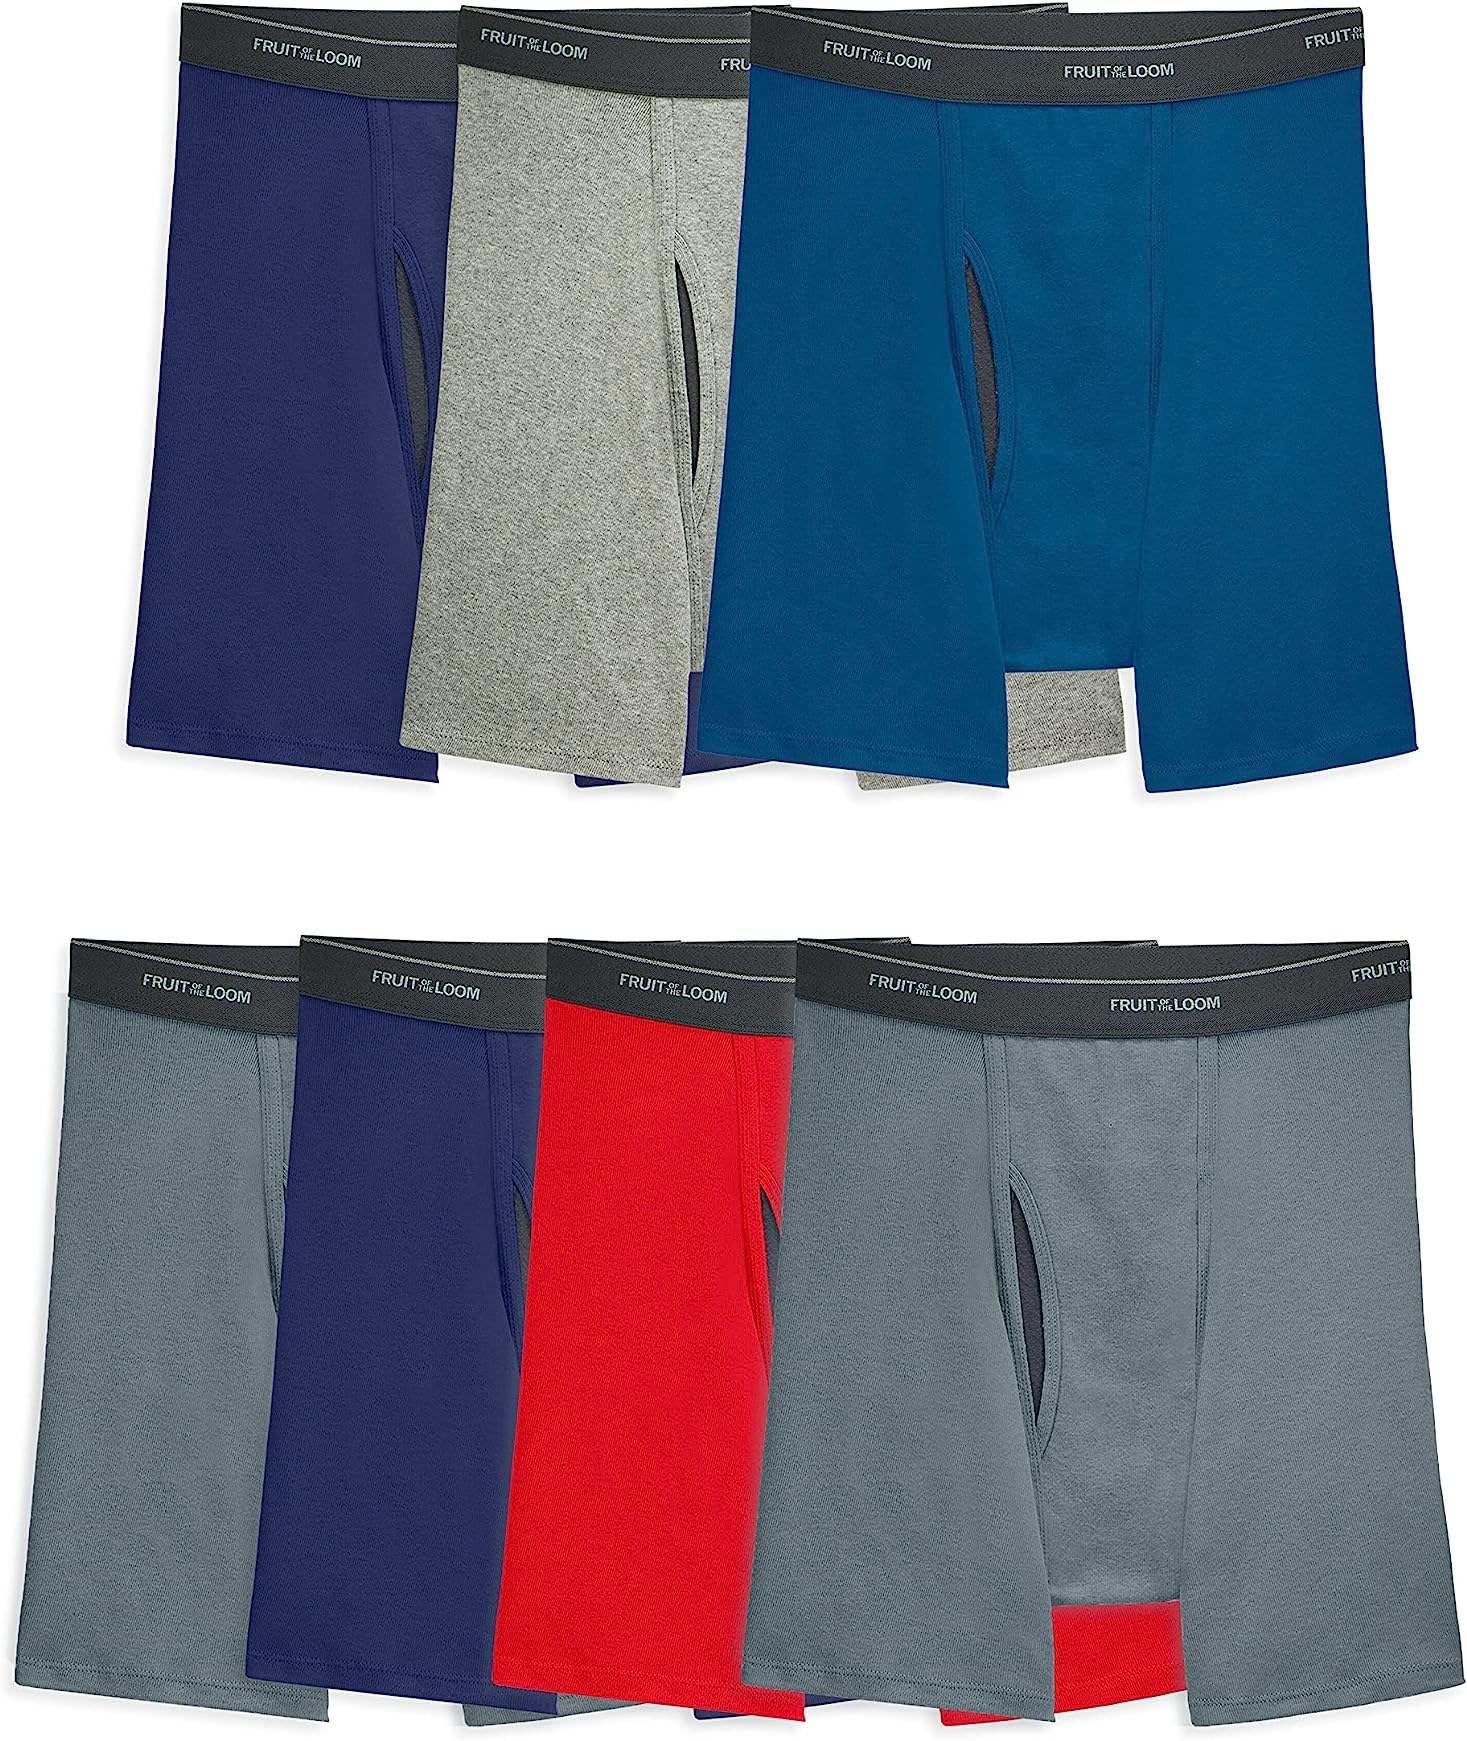 Men's Eversoft® CoolZone® Fly Boxer Briefs, Assorted 7 Pack